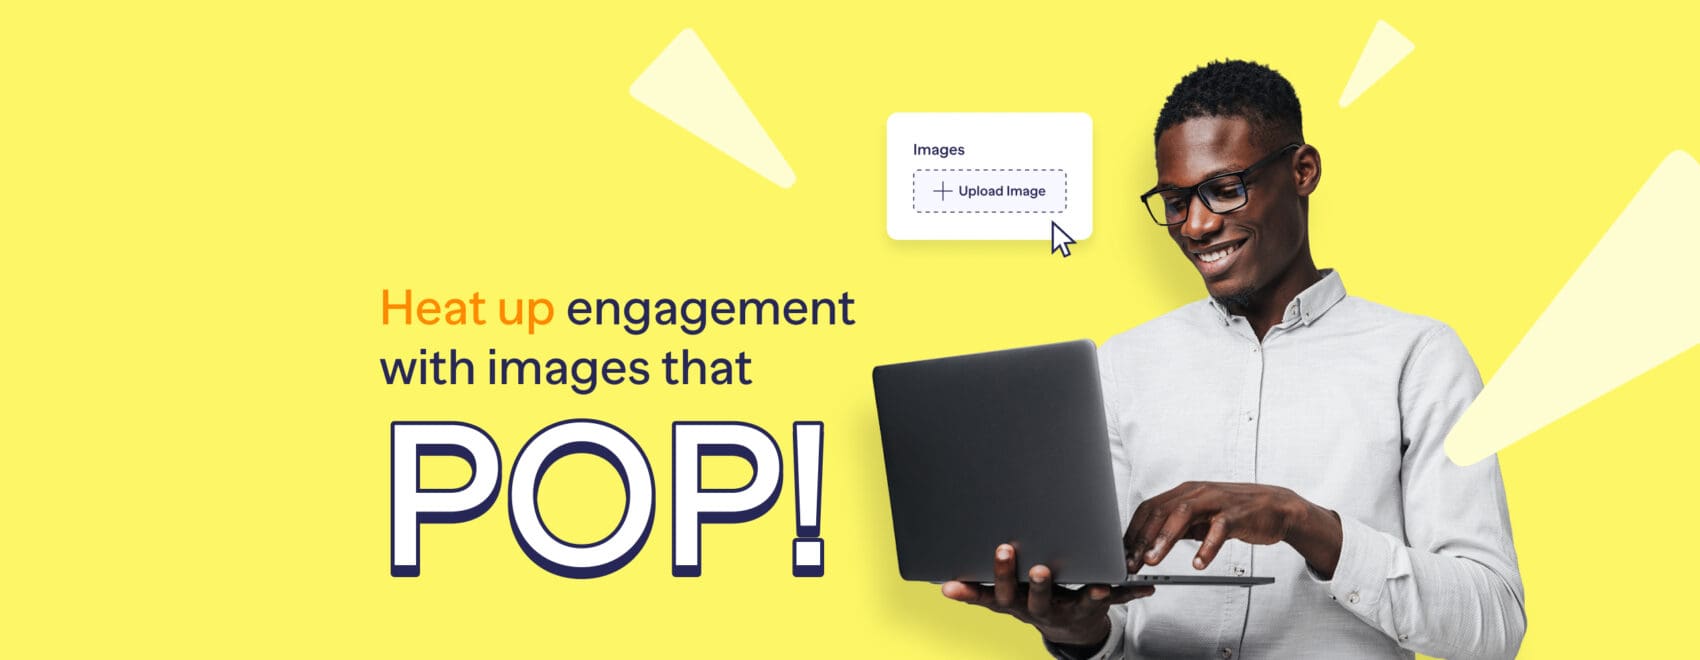 Heat up engagement with images that POP